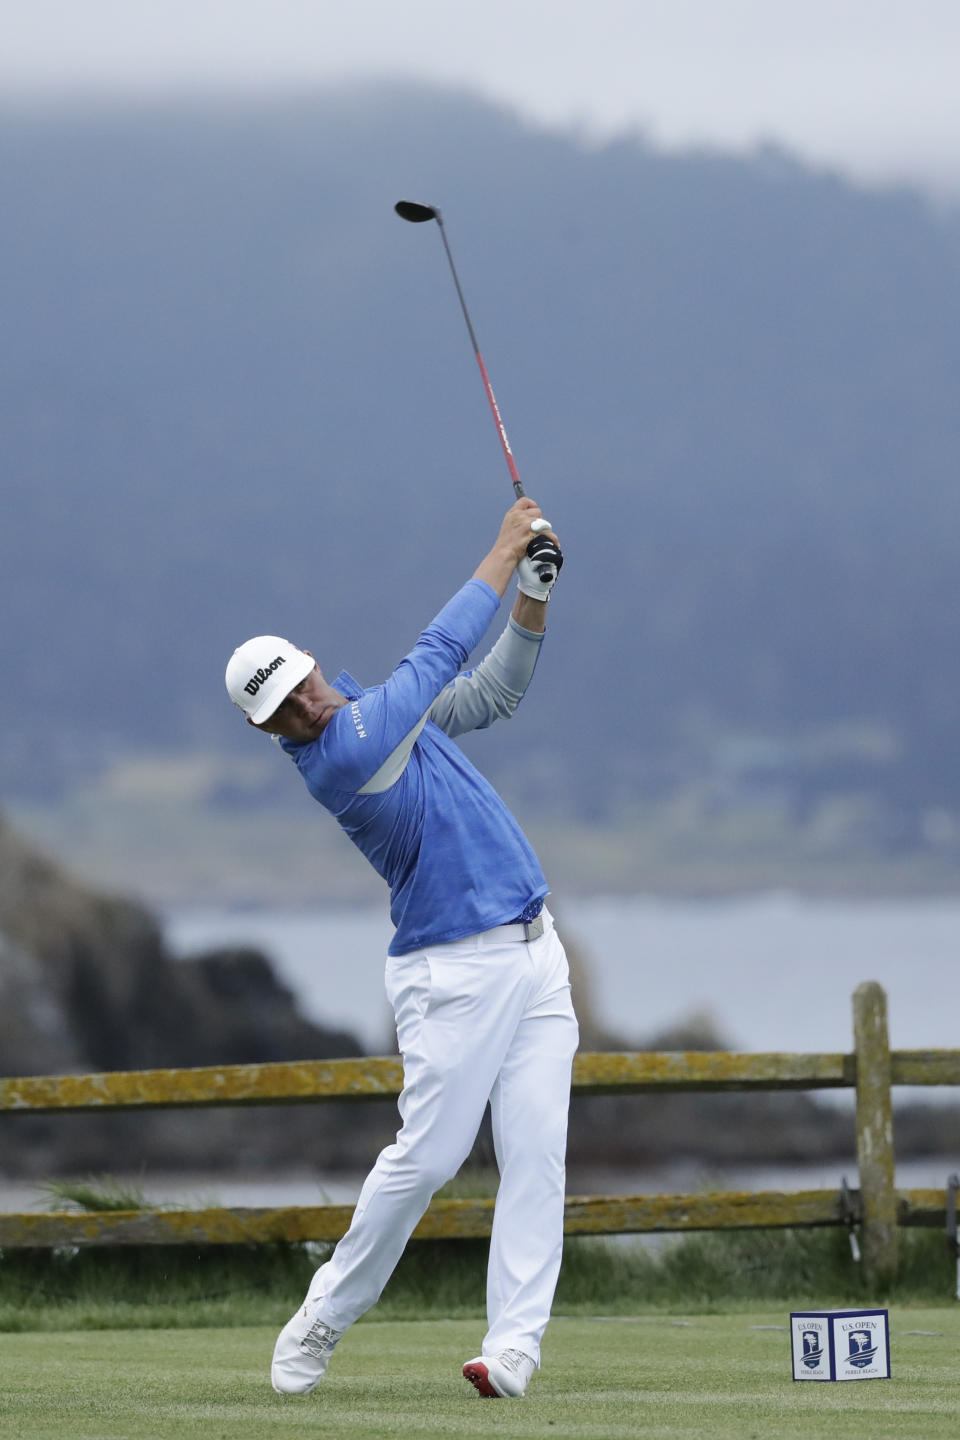 Gary Woodland watches his tee shot on the 18th hole during the third round of the U.S. Open golf tournament Saturday, June 15, 2019, in Pebble Beach, Calif. (AP Photo/Matt York)